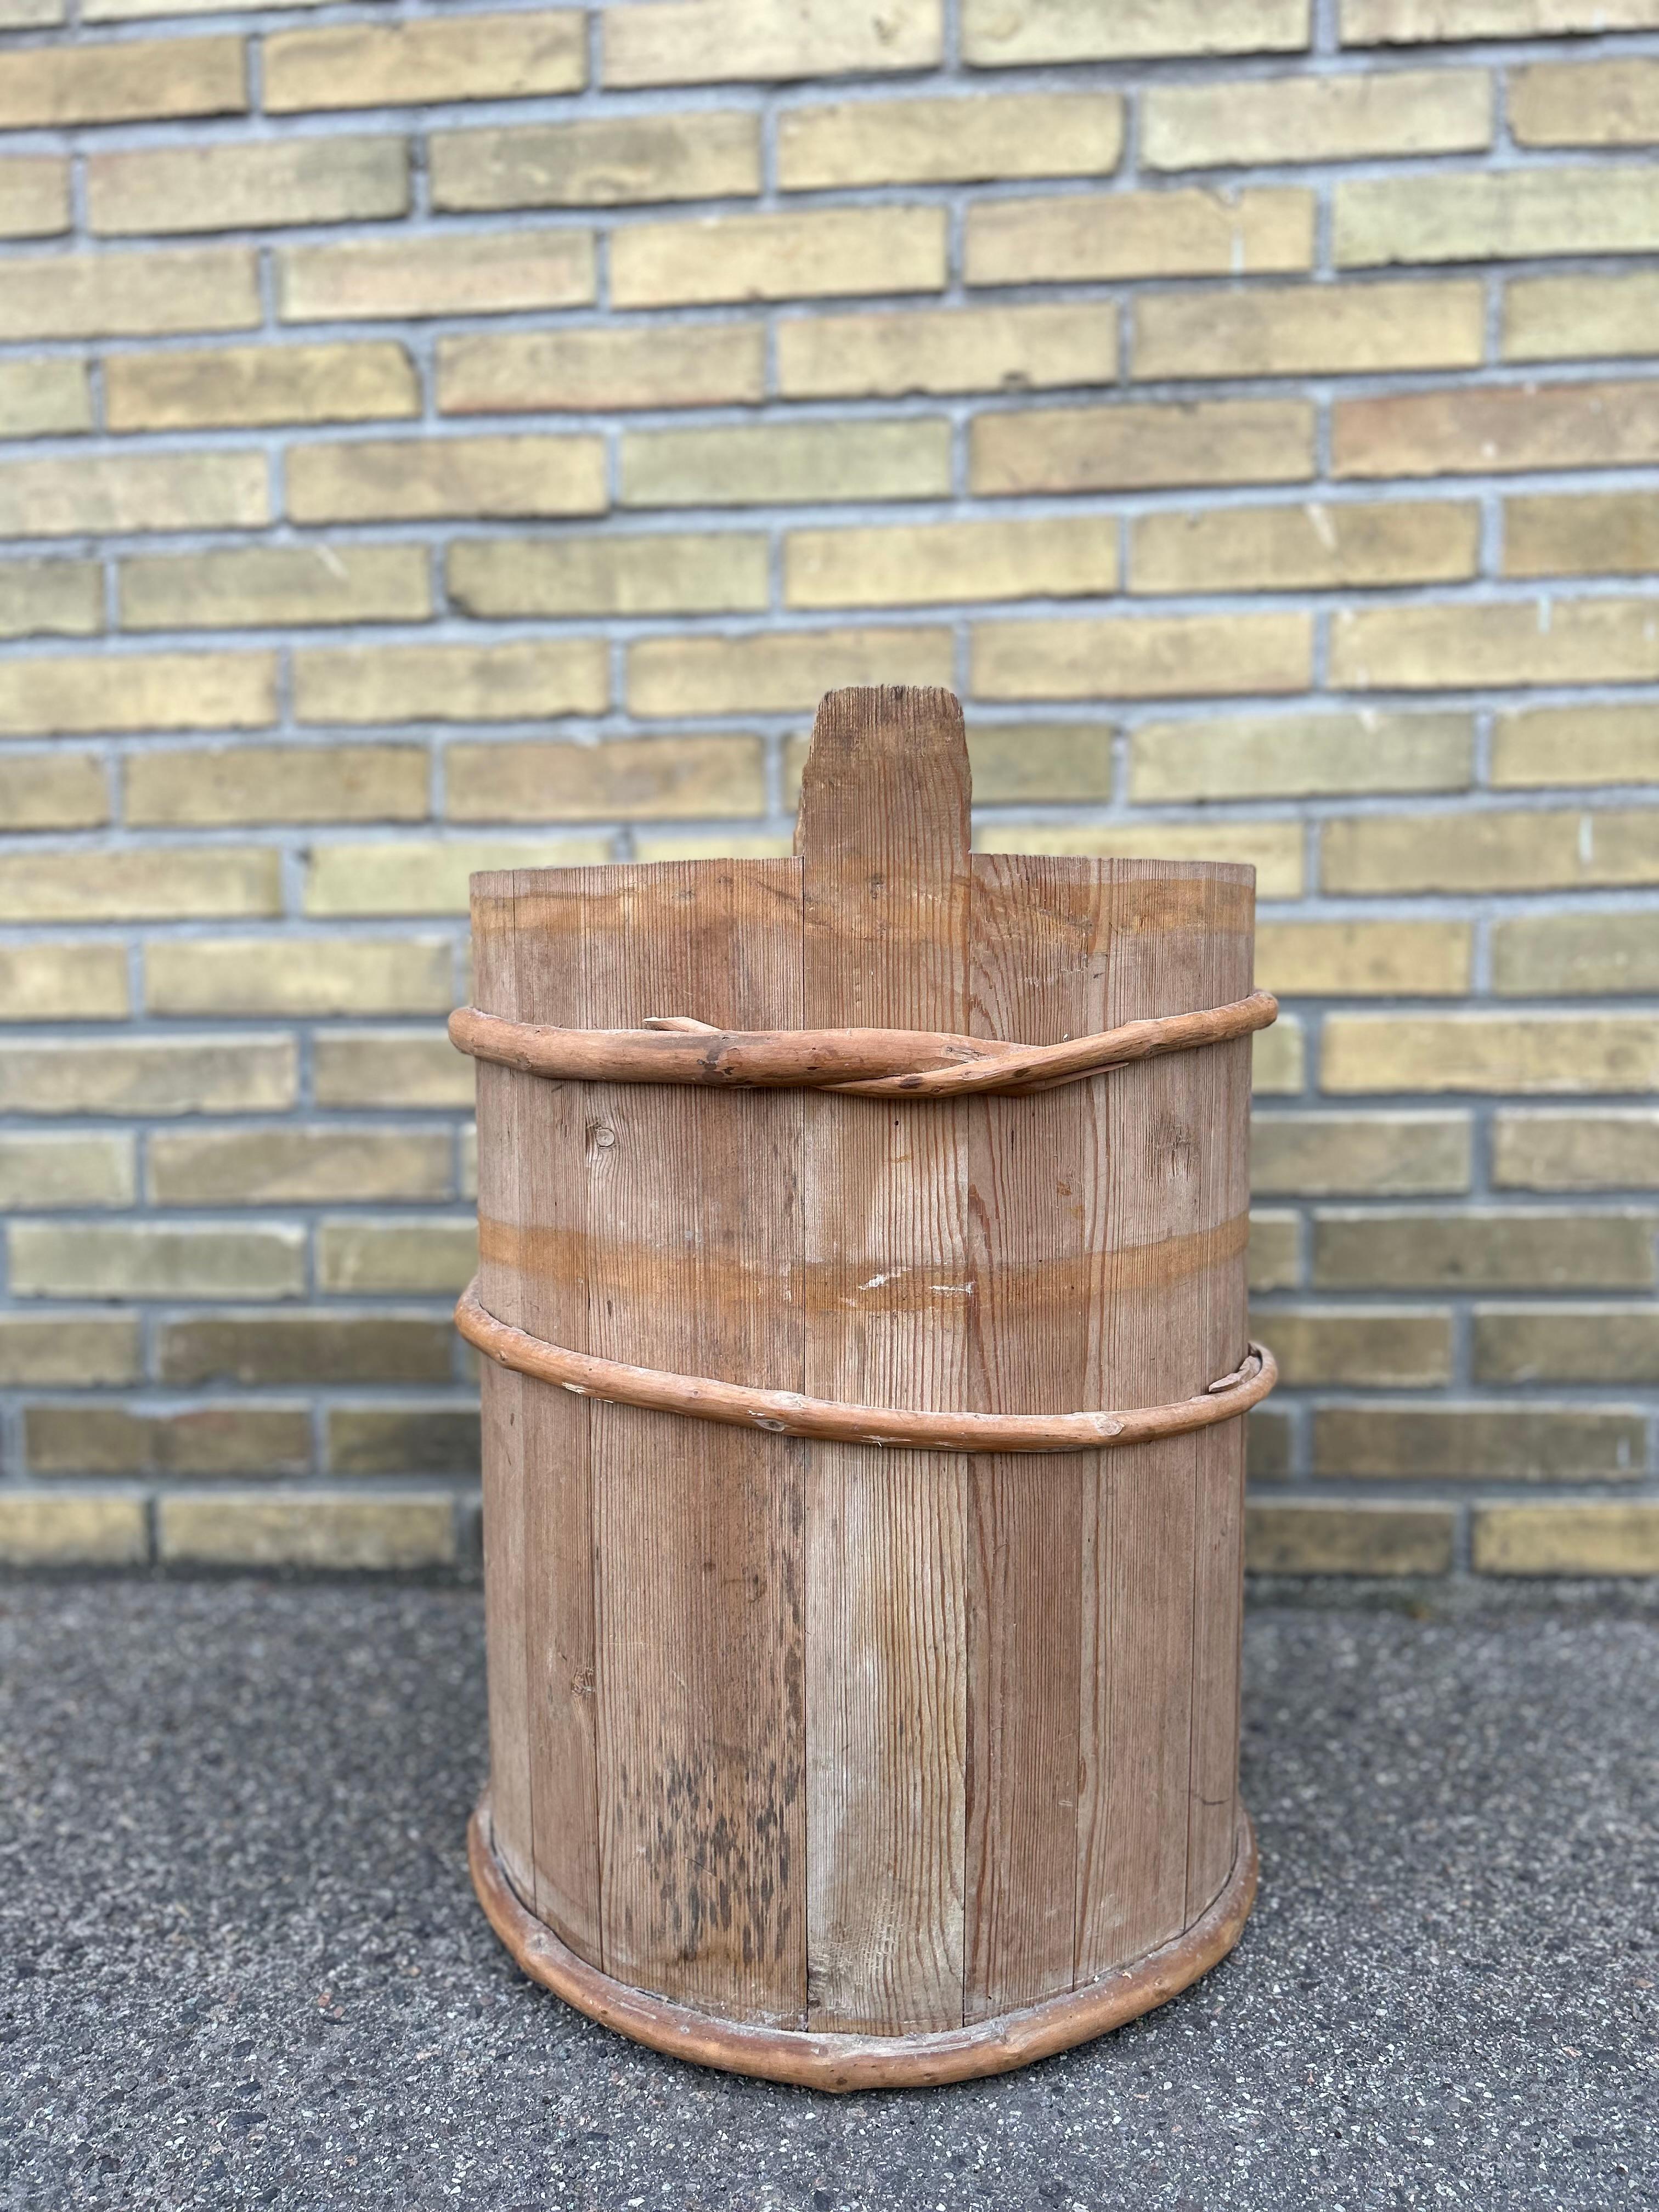 19th Century Swedish Wooden Folk Art Planter from the 1800s with Original Lid For Sale